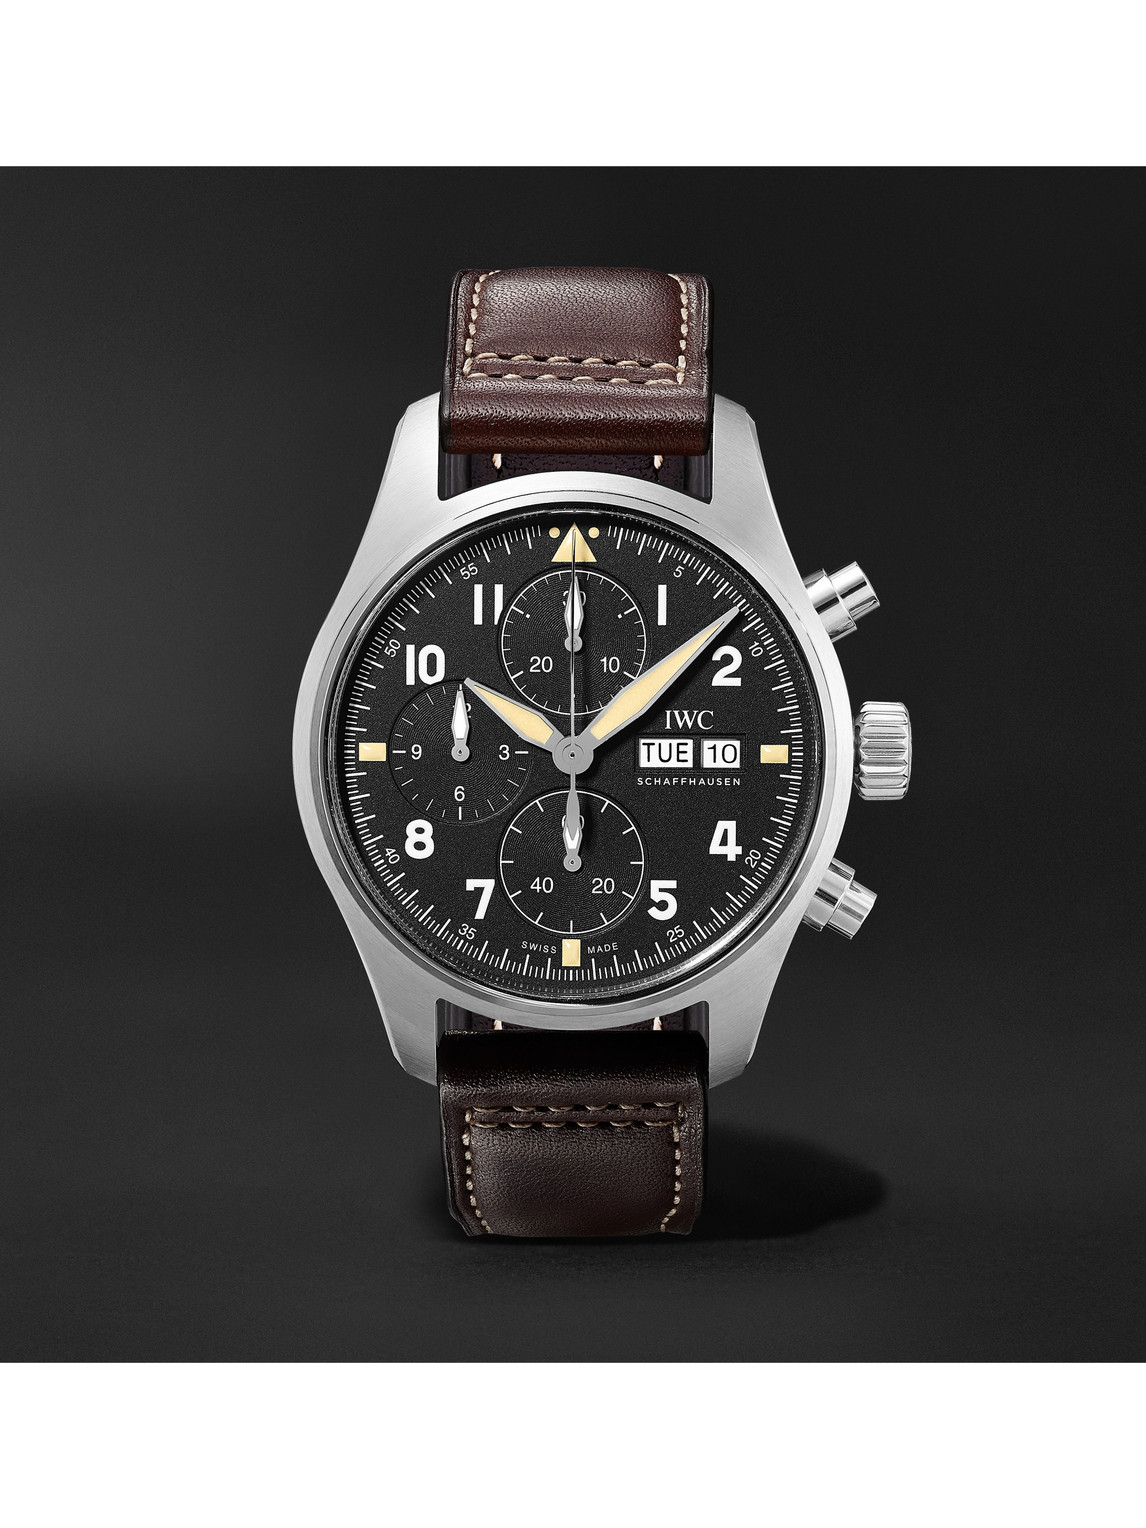 Iwc Schaffhausen Pilot's Spitfire Automatic Chronograph 41mm Stainless Steel And Leather Watch, Ref. No. Iw387903 In Black